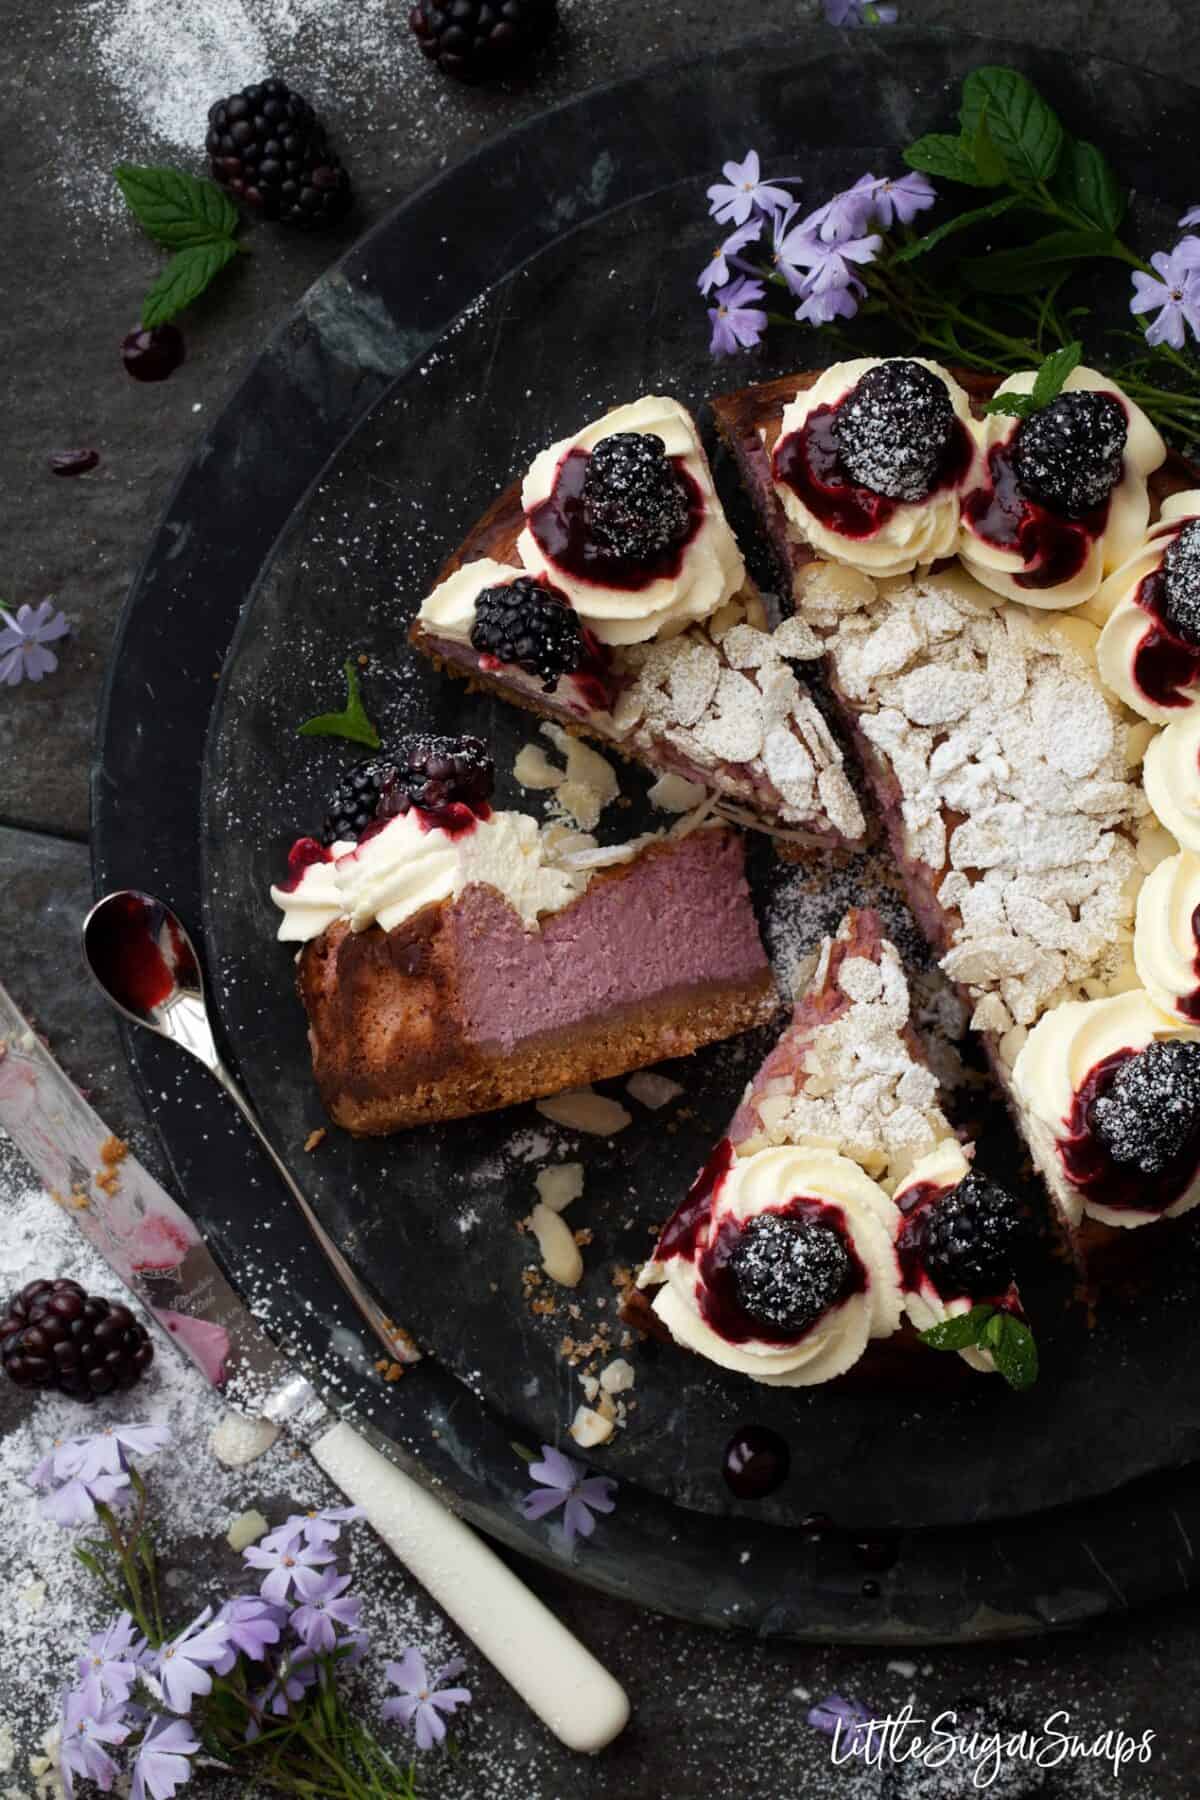 Blackberry Feta Cheesecake slices on a plate - one slice is on its side.